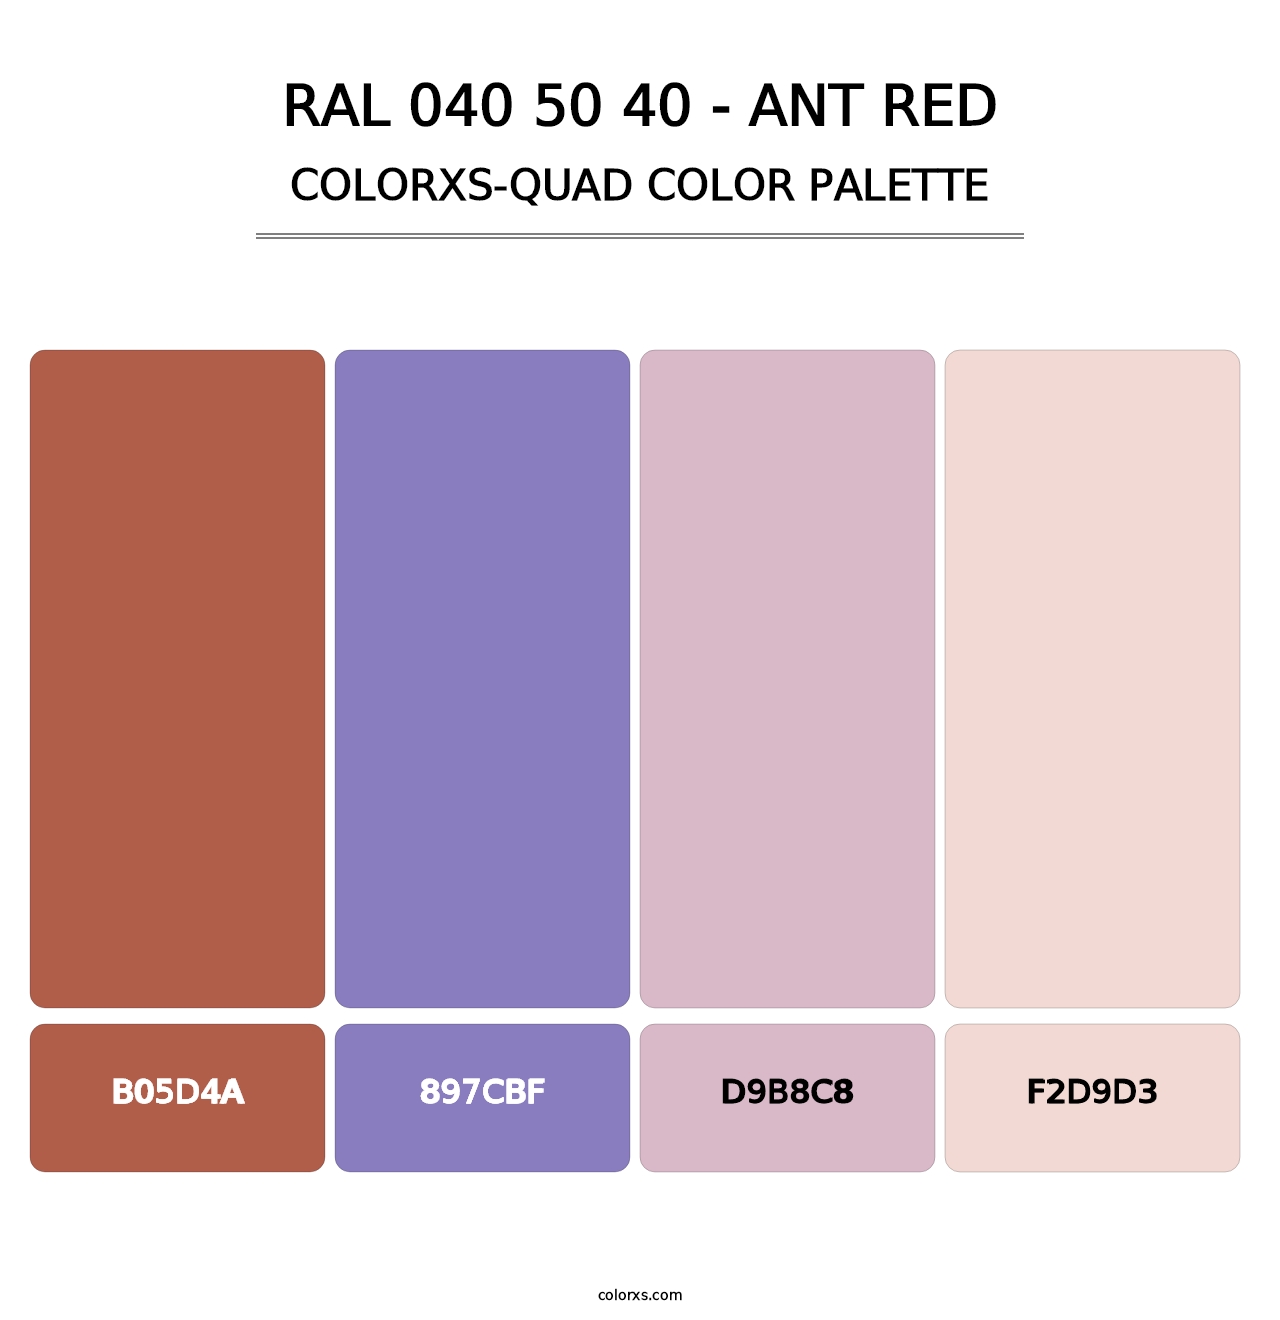 RAL 040 50 40 - Ant Red - Colorxs Quad Palette